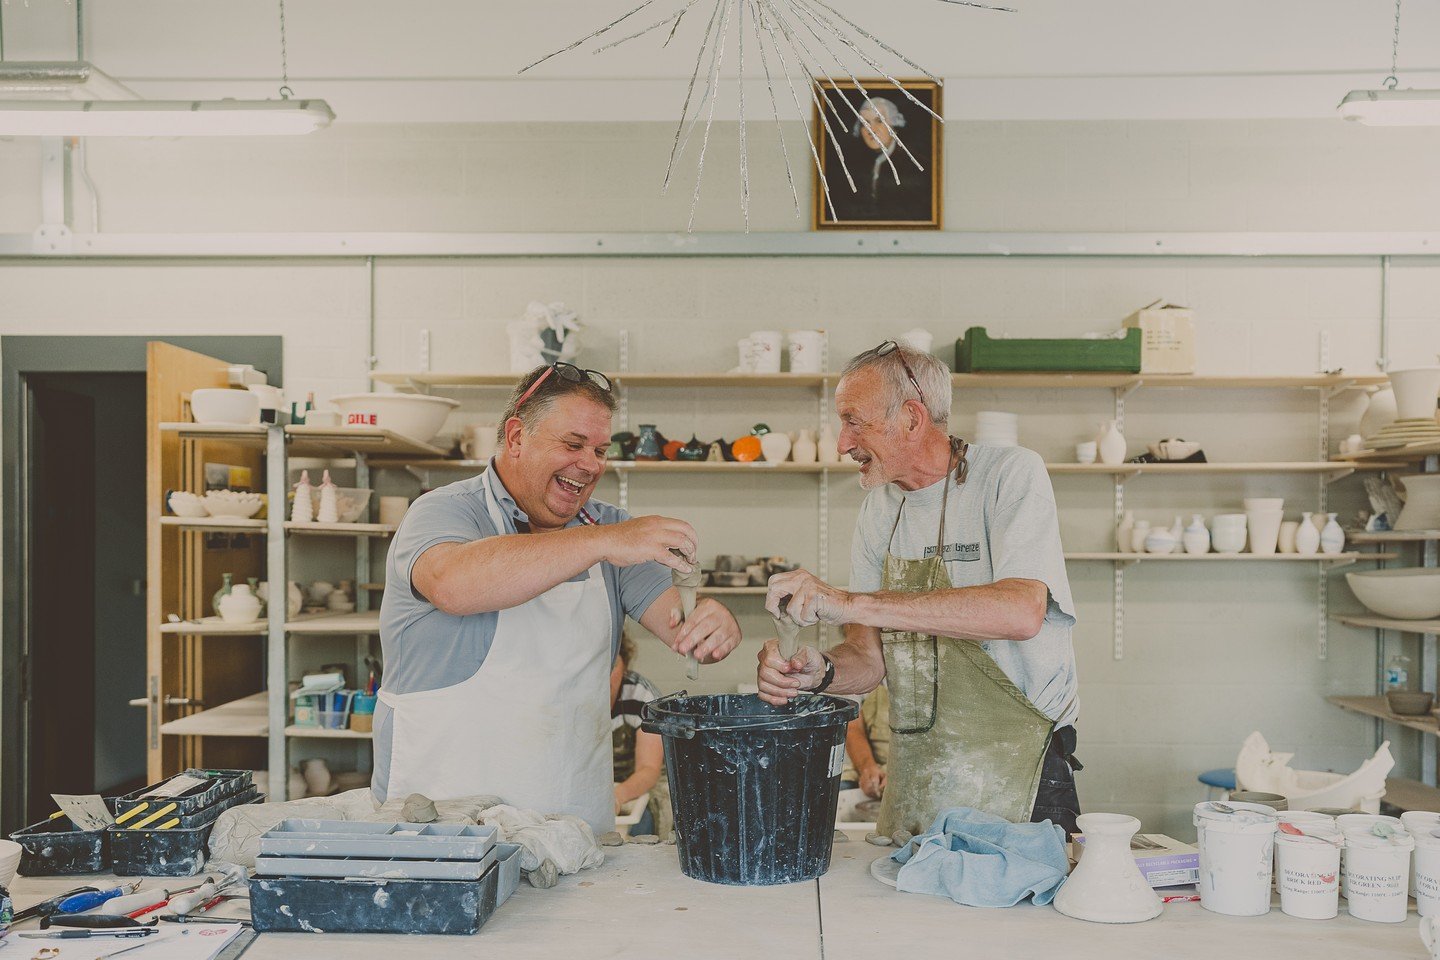 We have loved working with @valentineclays and @loveclay_ over the last few months to create some new content and information videos for them. Such a brilliant team to work with. 

#smallbizlife #smallbiztips #smallbizowner #smallbizlove #meetthemake